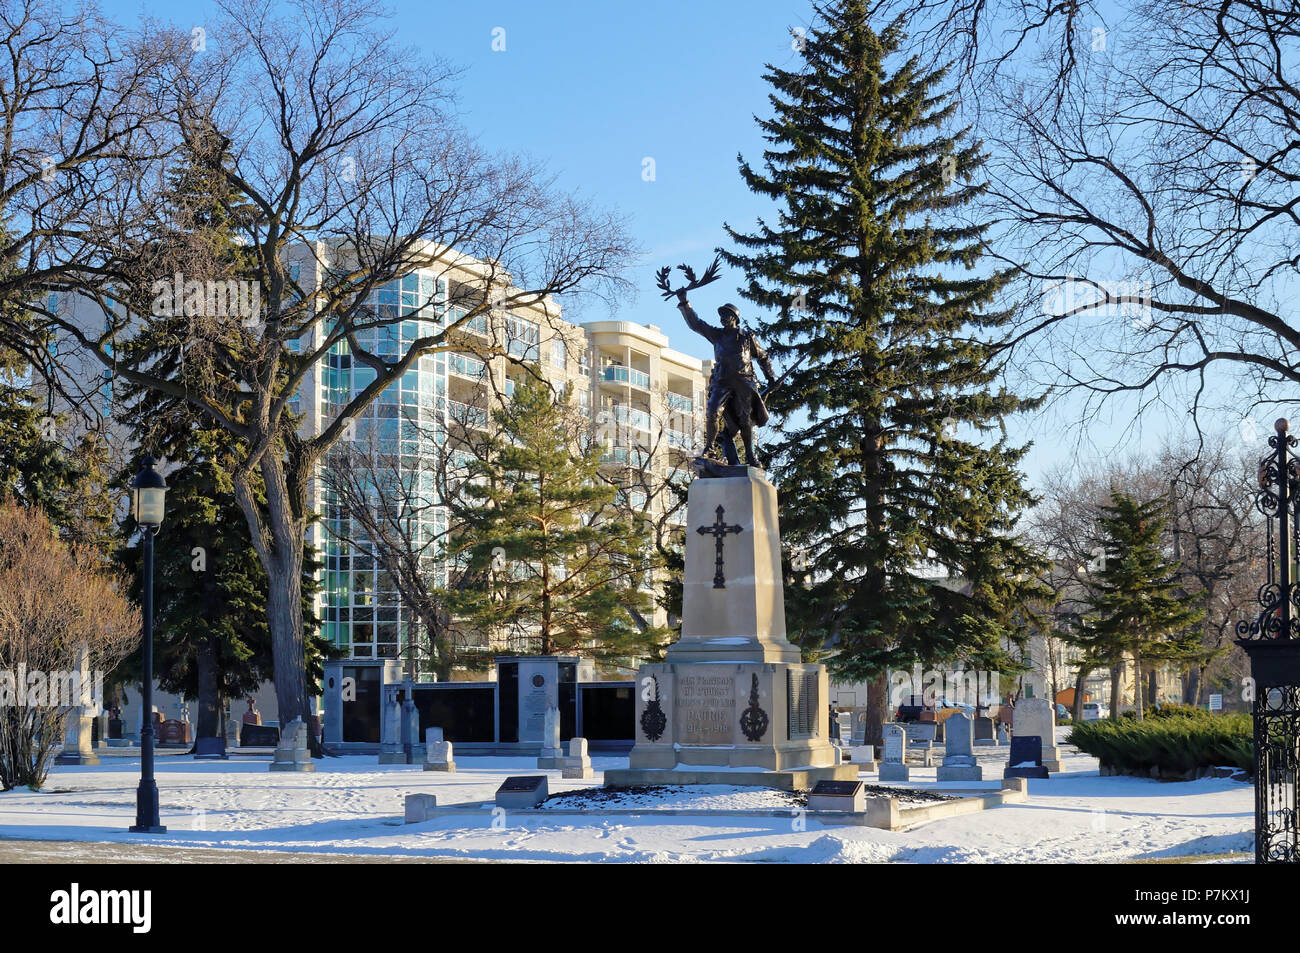 Winnipeg, Manitoba, Canada - 2014-11-18: Memorial site. Aux Fran ais de l'ouest morts pour leur Patrie 1914-1918 - a memorial dedicated to French-speaking Western Canadians who died fighting in WWI and WWII for the liberation of France Stock Photo